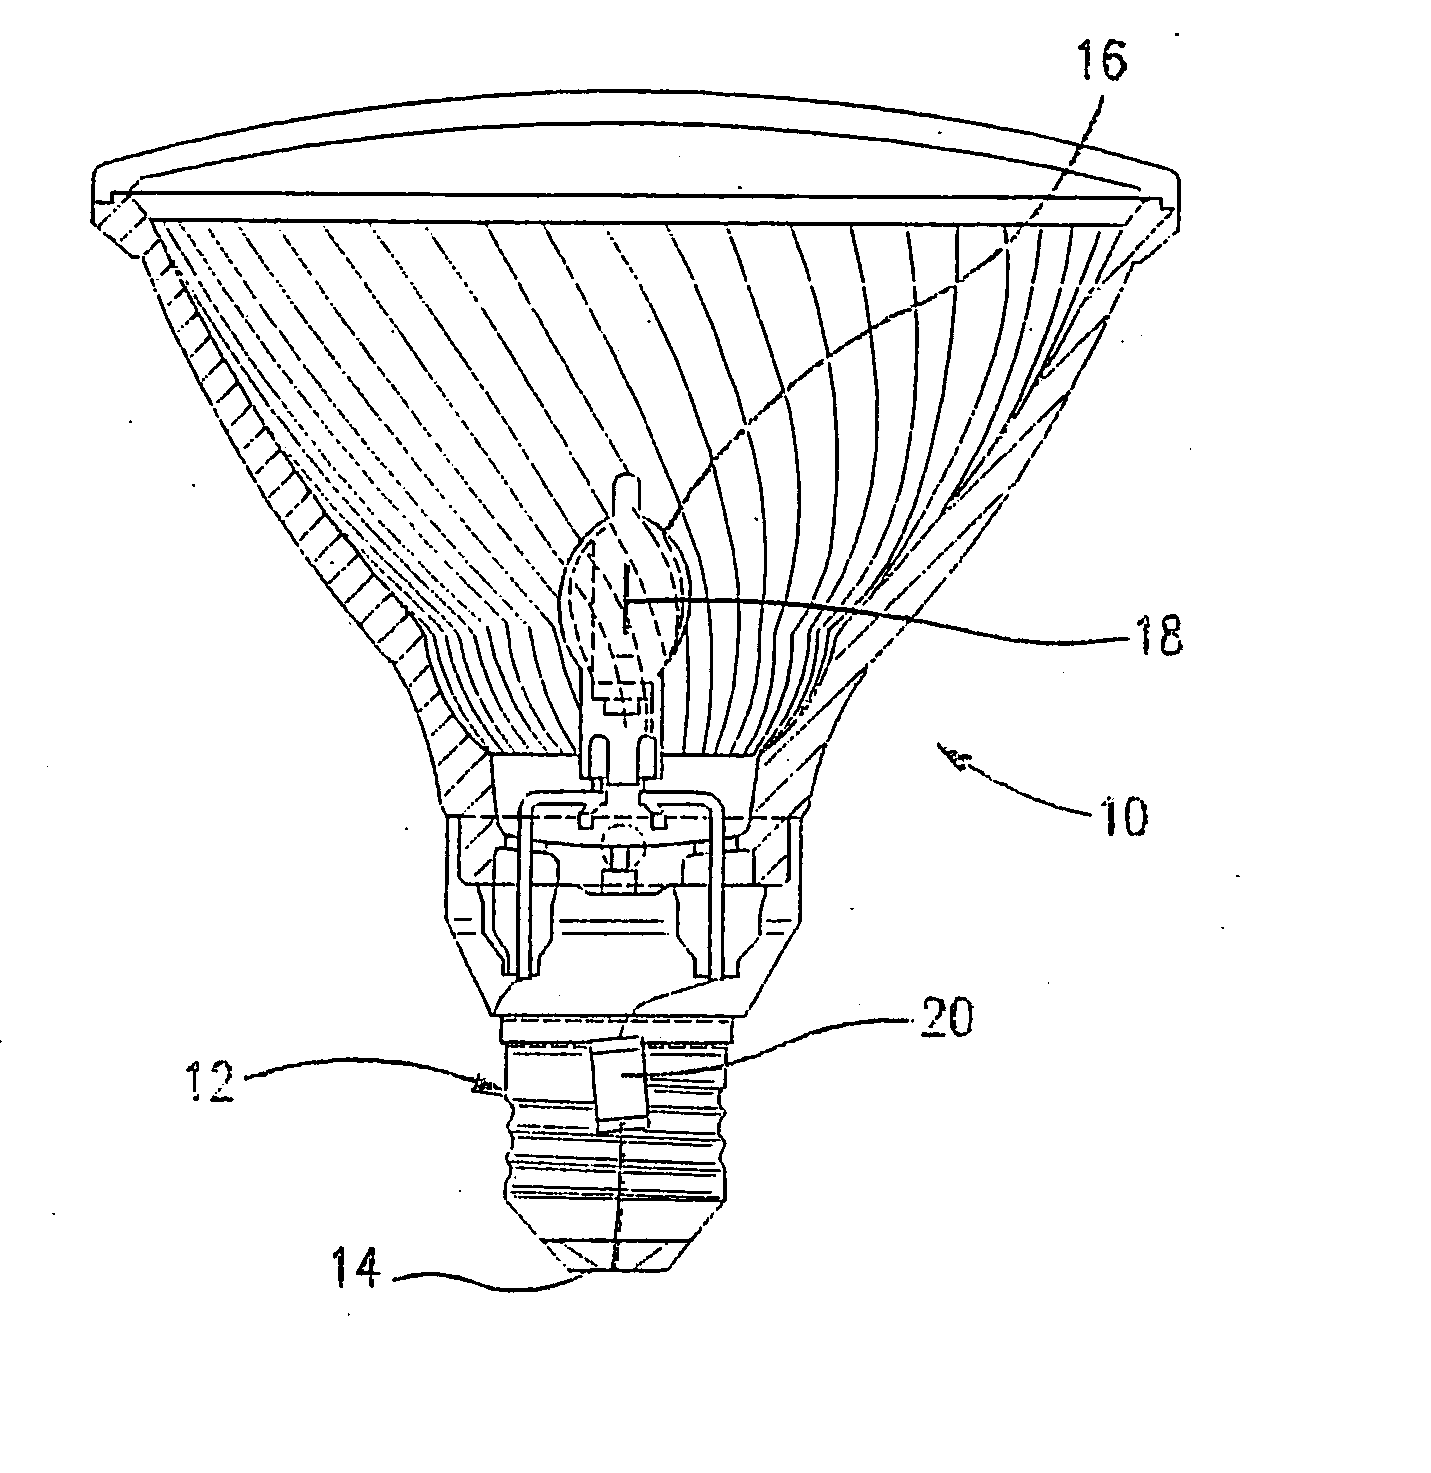 Lamp containing soft-start power supply